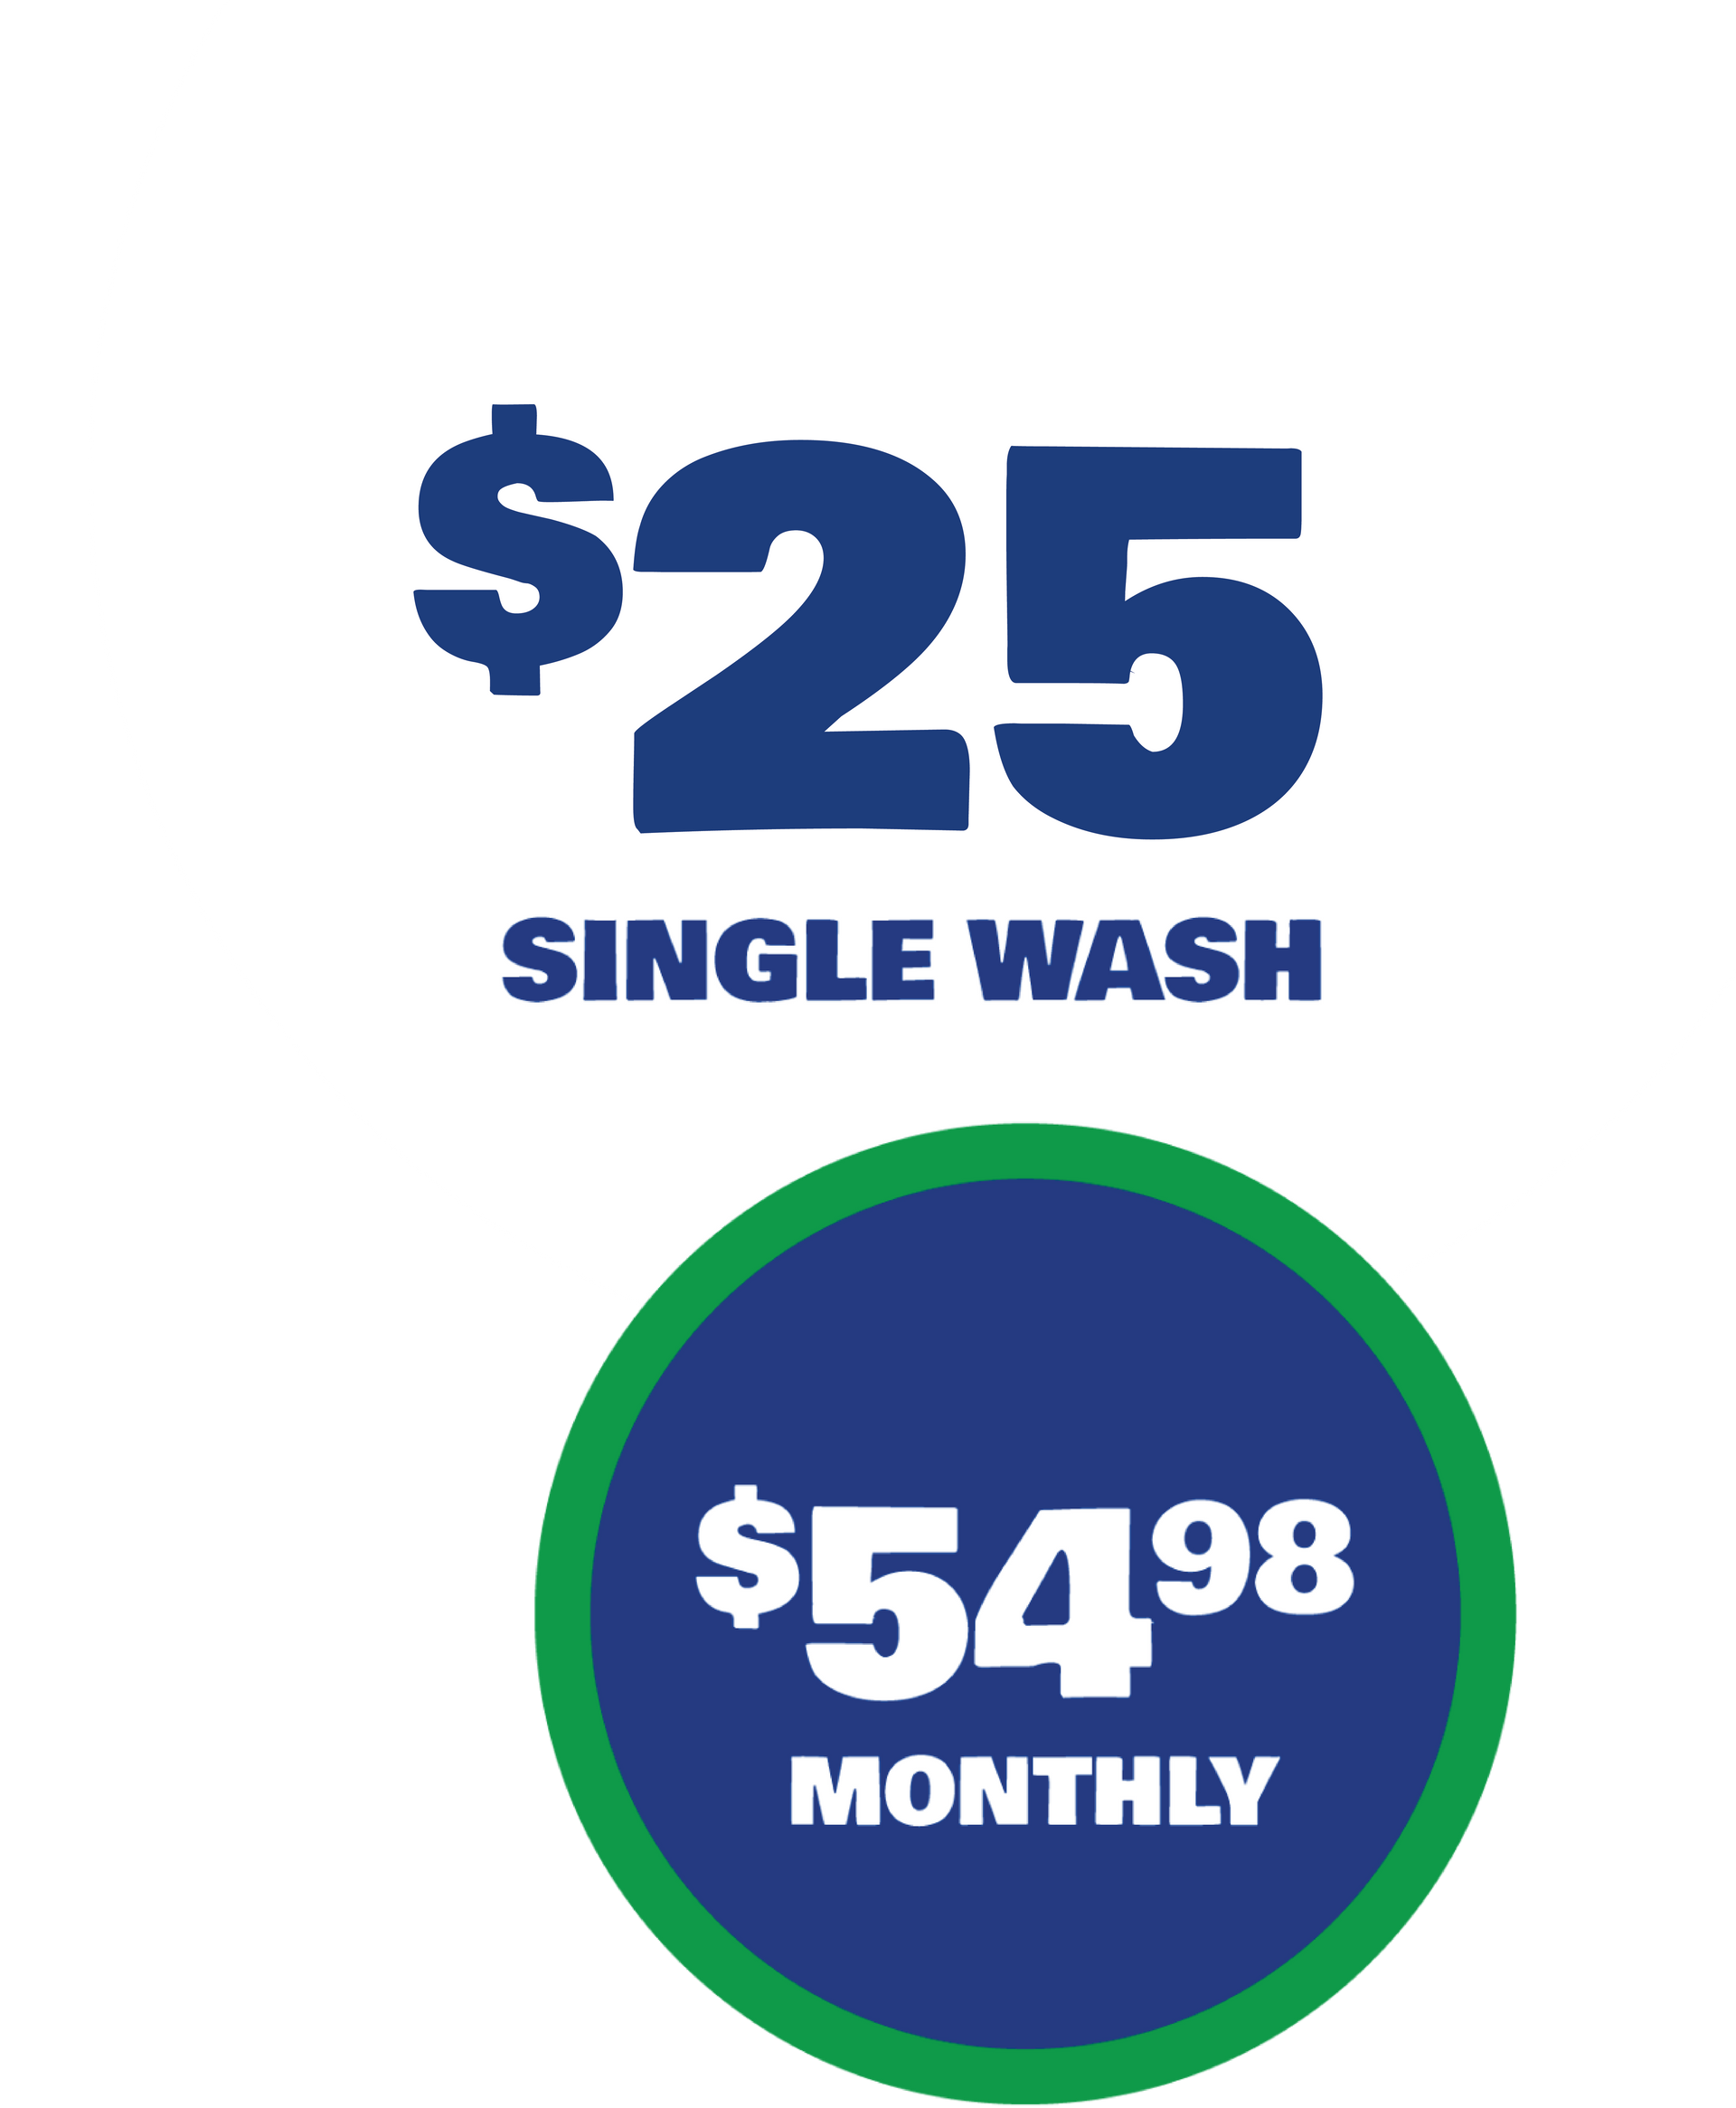 a sign that says $ 25 single wash and $ 54.98 monthly